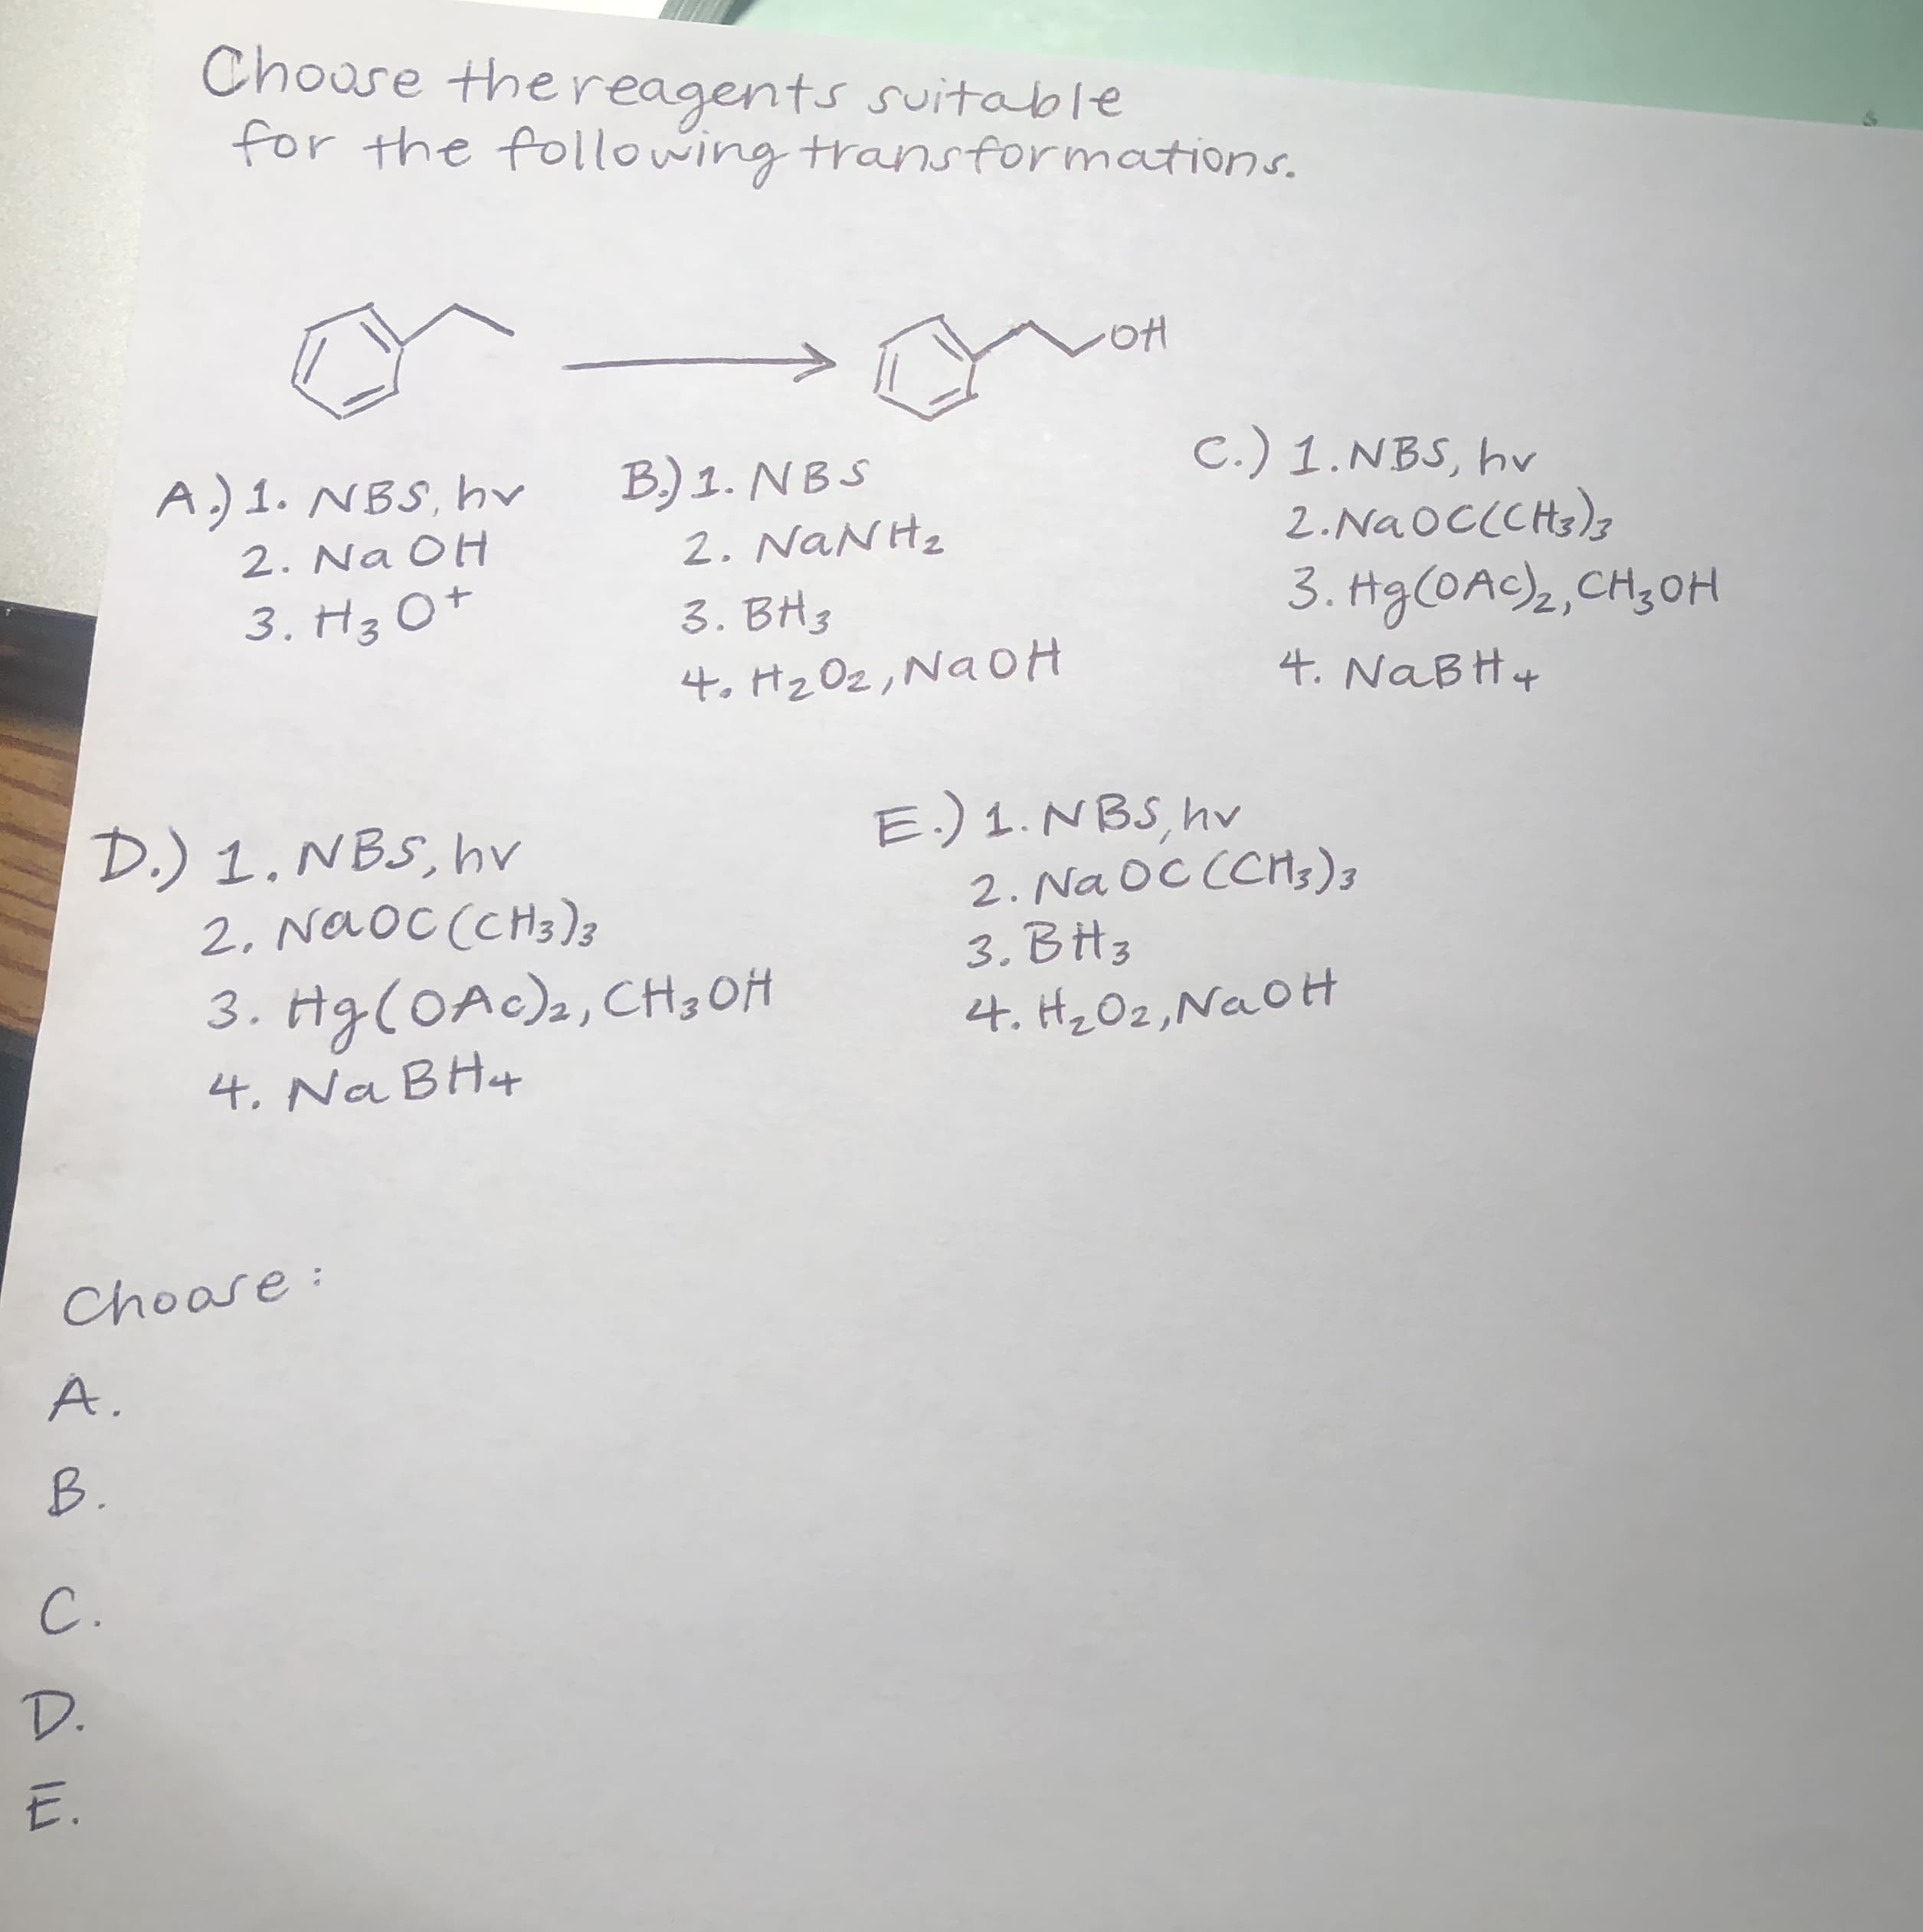 Chouse the reagents suitable
for the following transformations.
A.) 1. NBS, hv
2. Na OH
3. H3 O+
B) 1. NB S
2. NaNH2
3. BH3
4. Hz Oz, Na OH
C.) 1.NBS, hv
2.NaOCCCHs)z
3. Hg(OAC)2,CH;0H
4. NaBH4
D.) 1. NBS, hv
2. Naoc (CHs)z
3. Hg(OAc)2, CH3 OH
4. Na BH4
E.) 1. NBS, hv
2. Na OC CCH;),
3. ВНз
4. Hz Oz,NaOH
Choose:
A.
B.
C.
D.
E.
